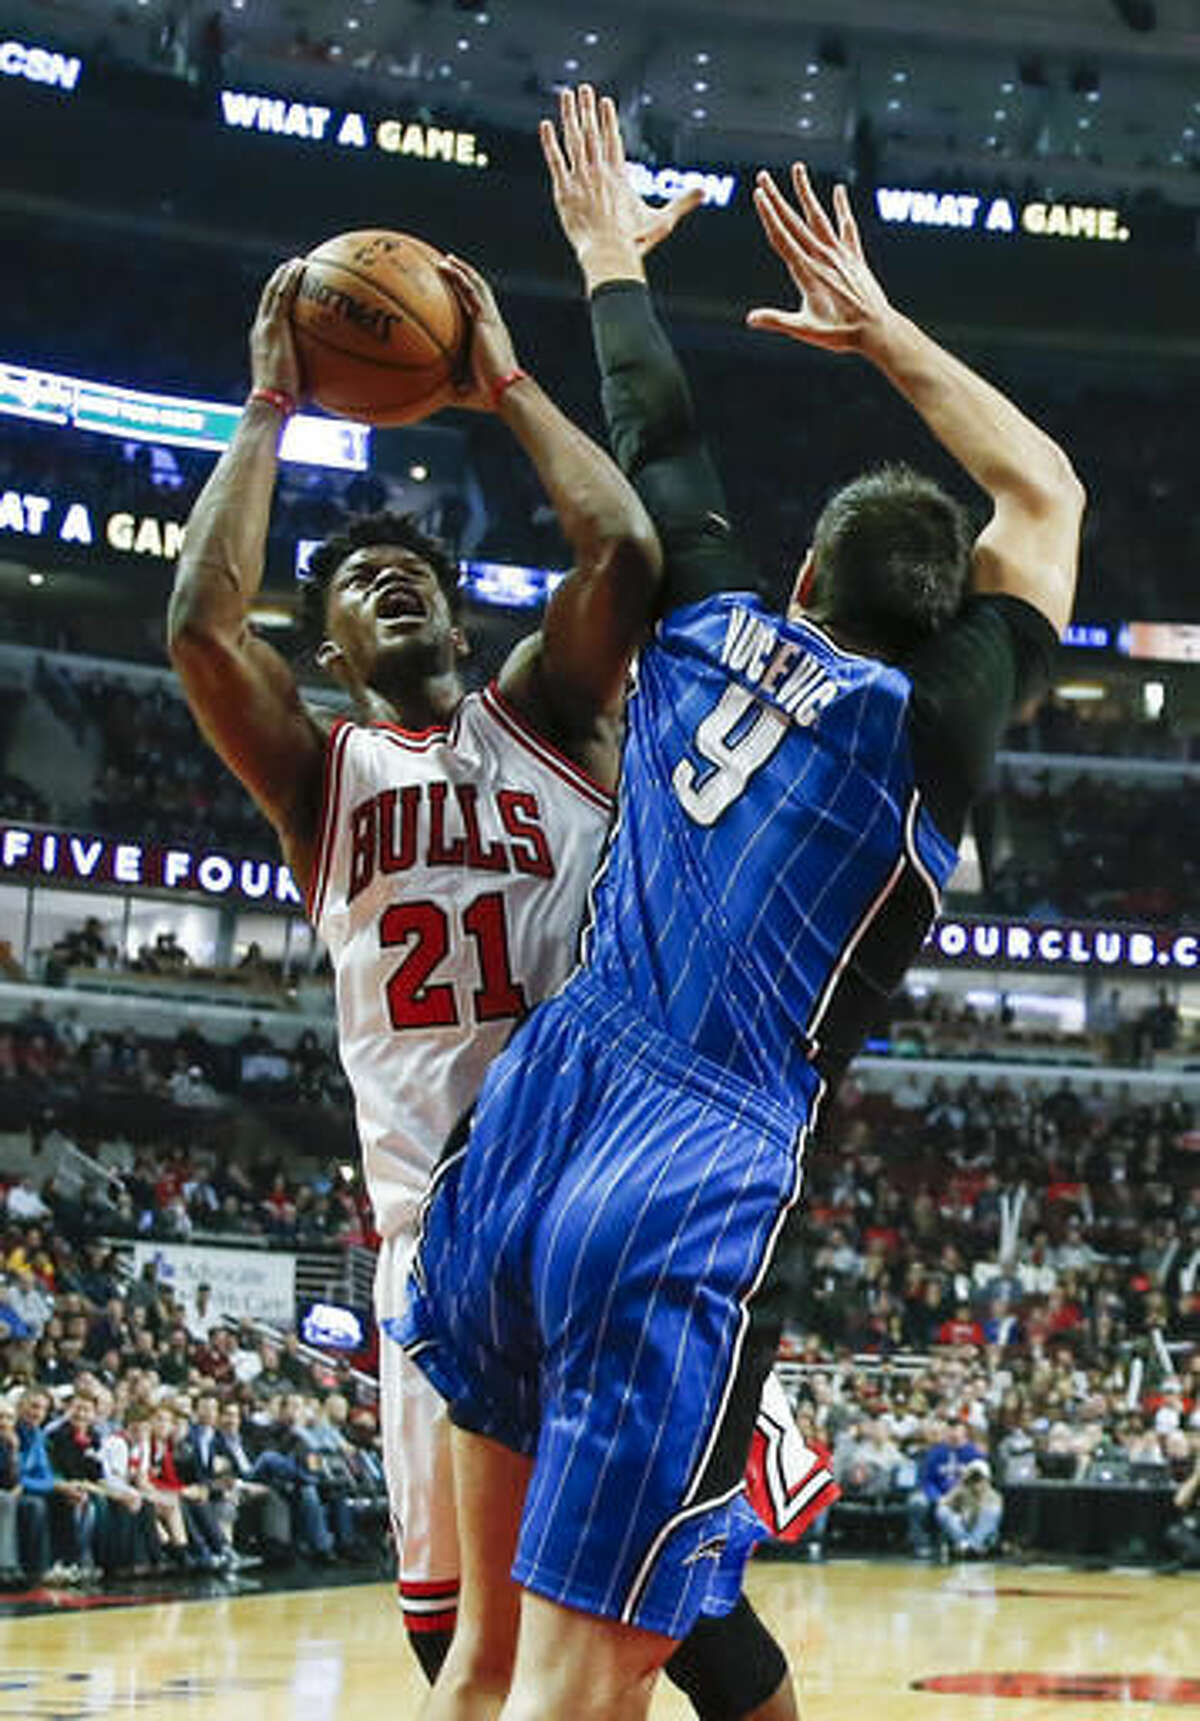 Orlando Magic center Nikola Vucevic, right, fouls Chicago Bulls guard Jimmy Butler, left, during the first half of an NBA basketball game, Monday, Nov. 7, 2016, in Chicago. (AP Photo/Kamil Krzaczynski)